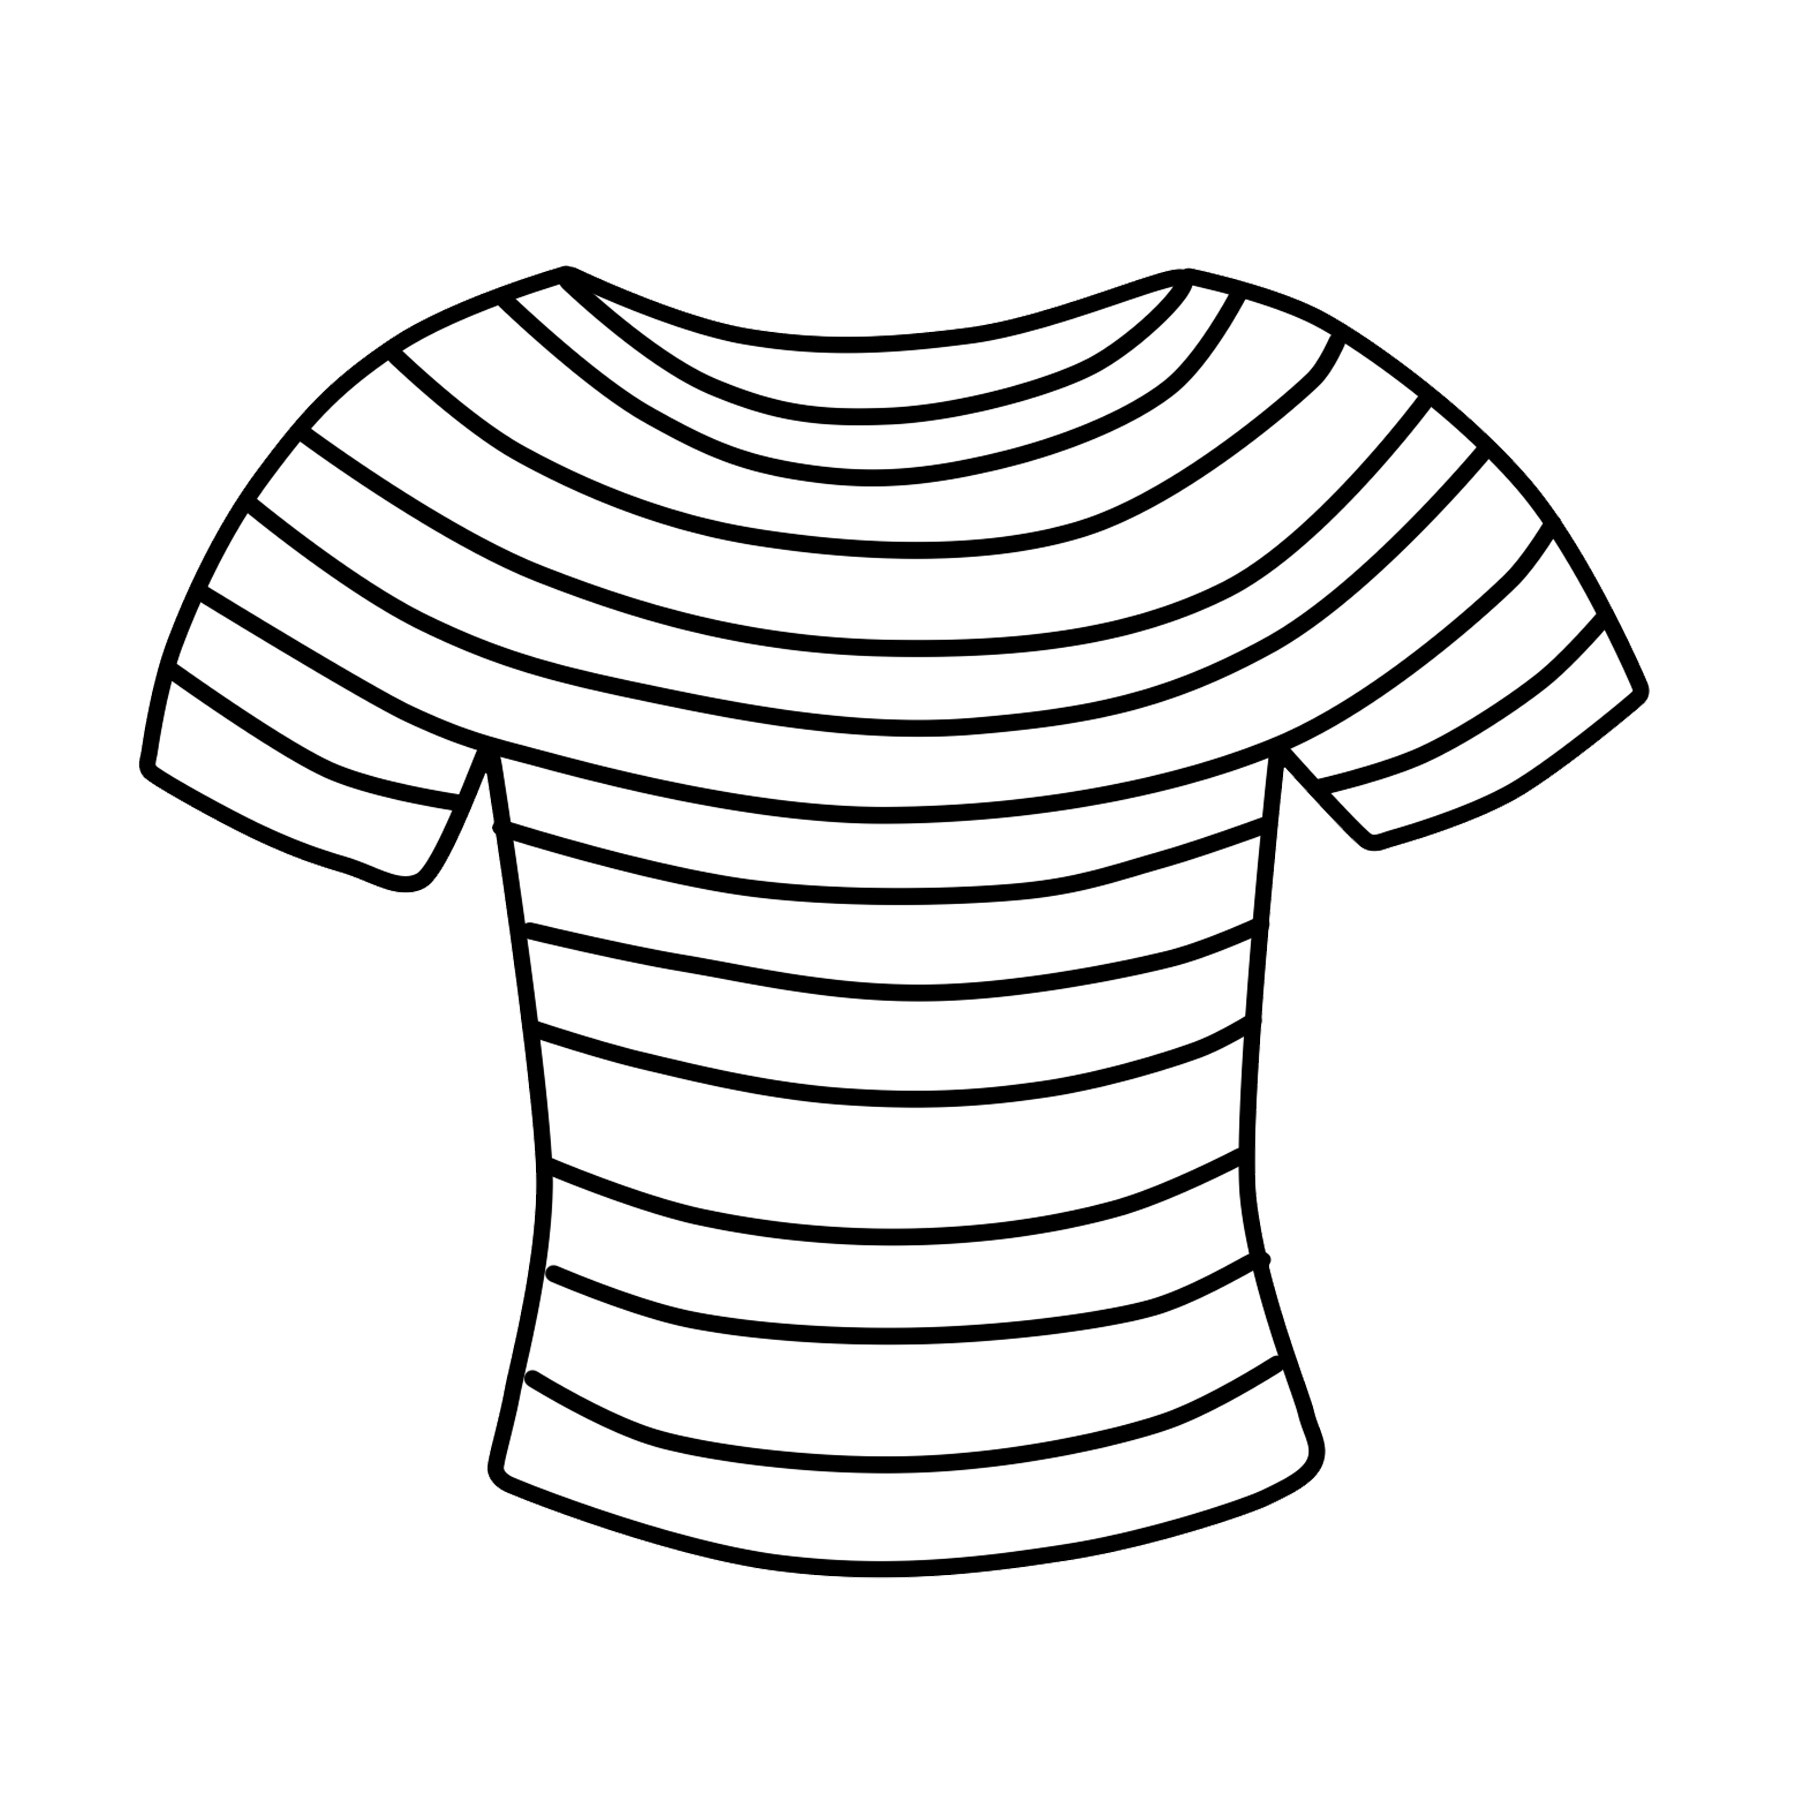 T Clipart Wiring Diagram Database Shirt Free Striped Clip.